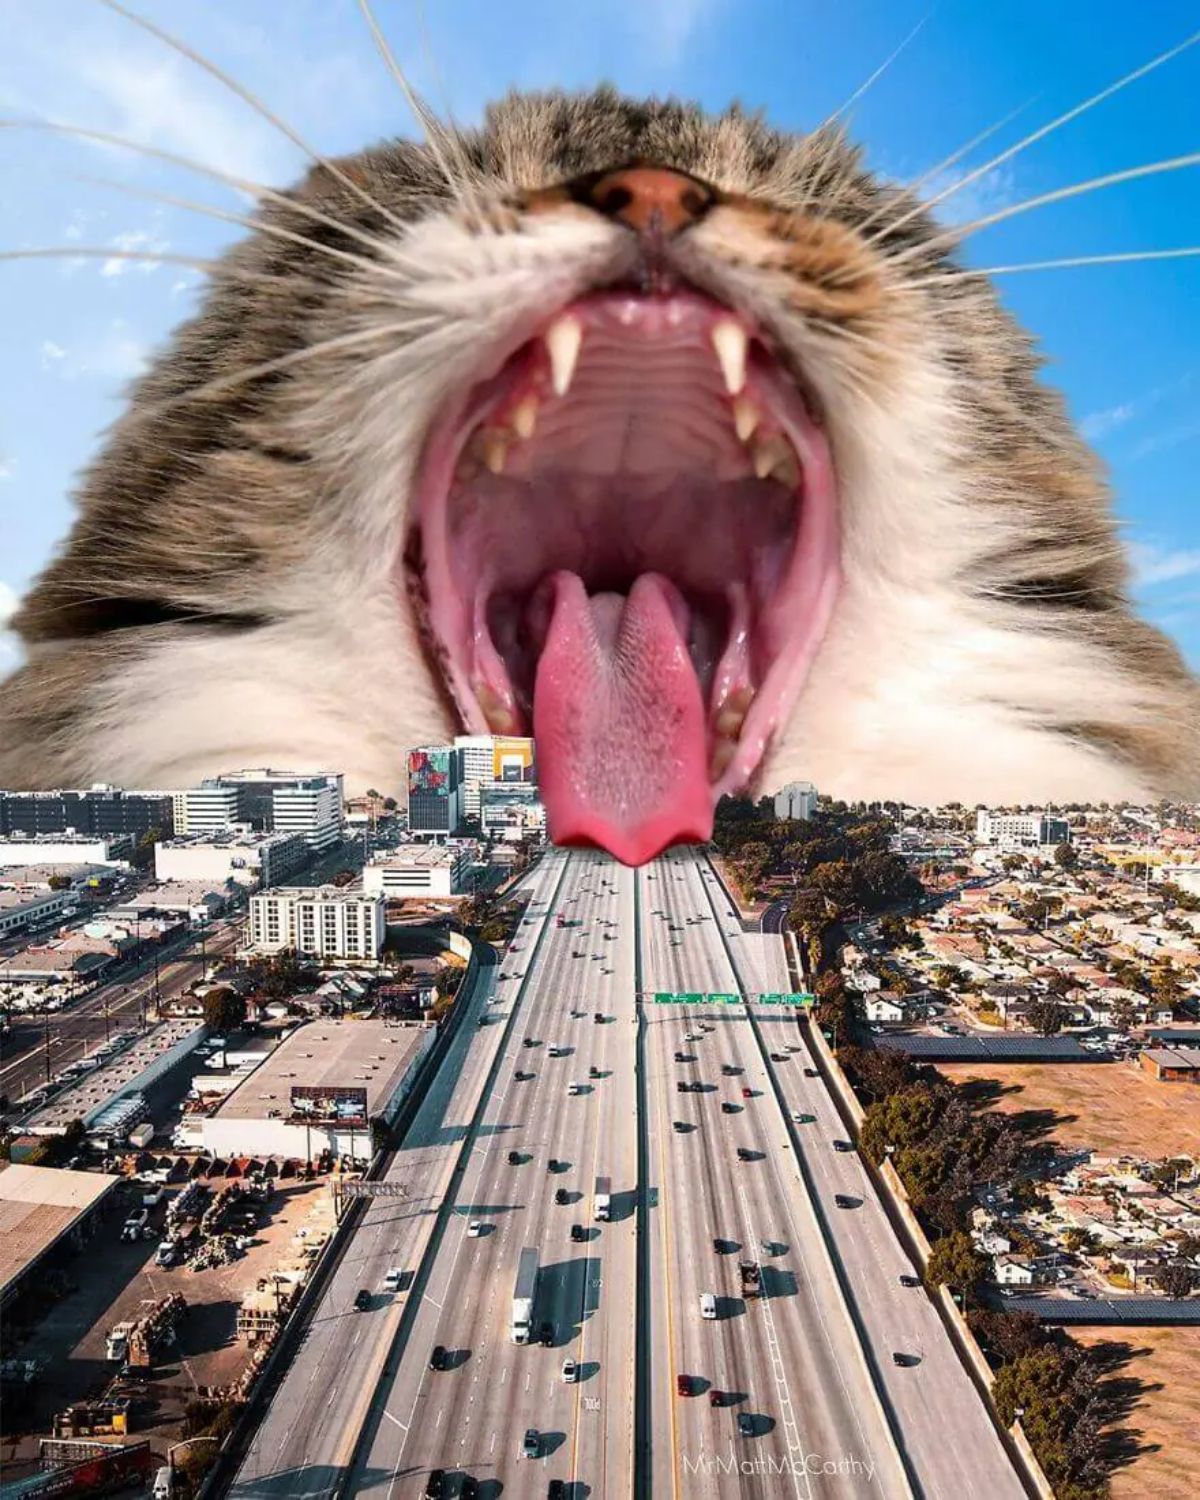 large photoshopped grey and white tabby cat with the mouth wide open in front of a highway